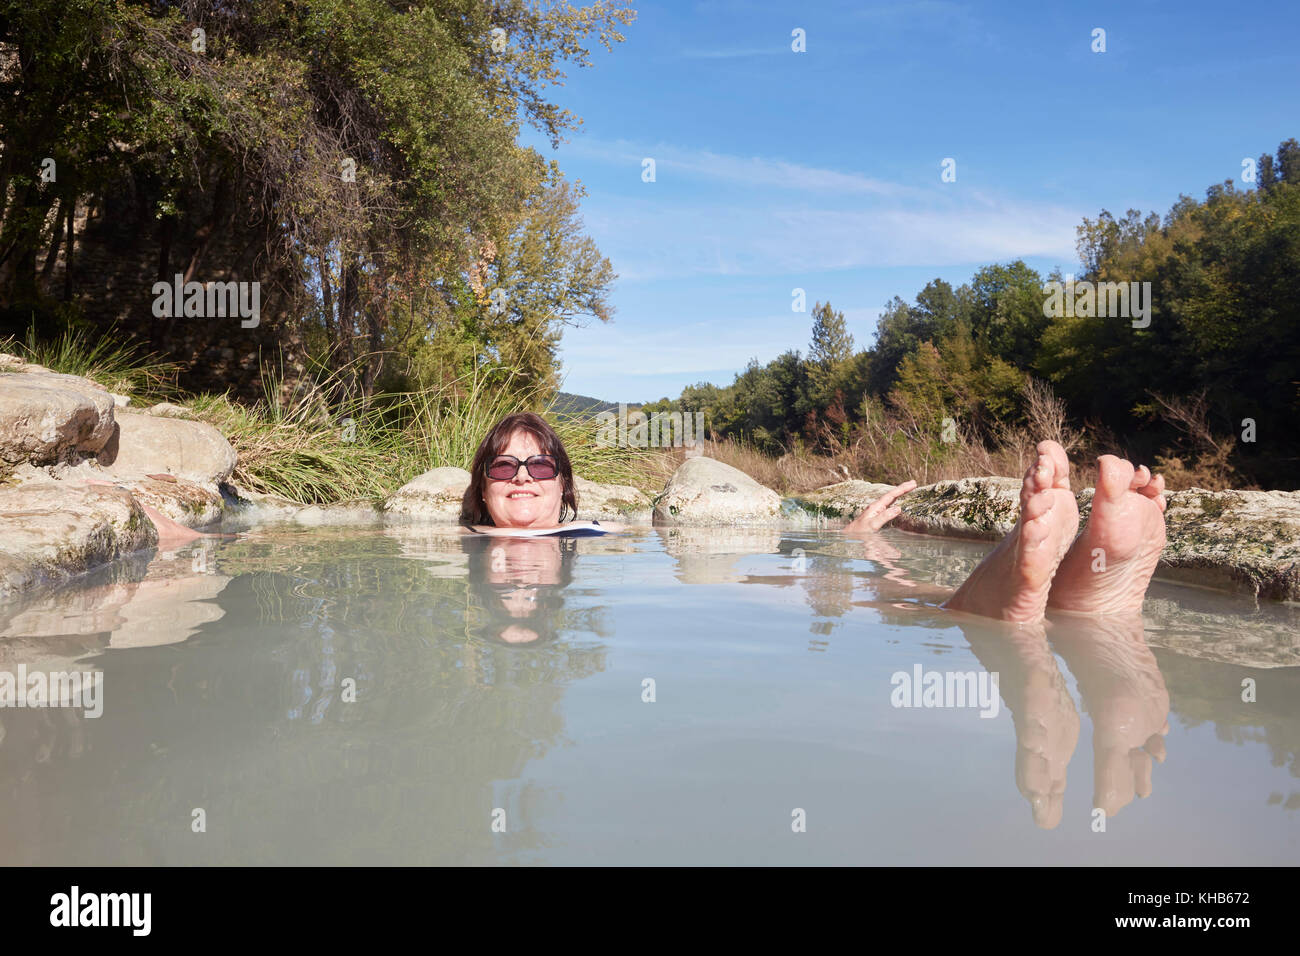 A swimmer in the geothermal hot springs on the River Farma, Bagni di Petriolo, district of Monticiano, Province of Siena, Tuscany, Italy. Stock Photo